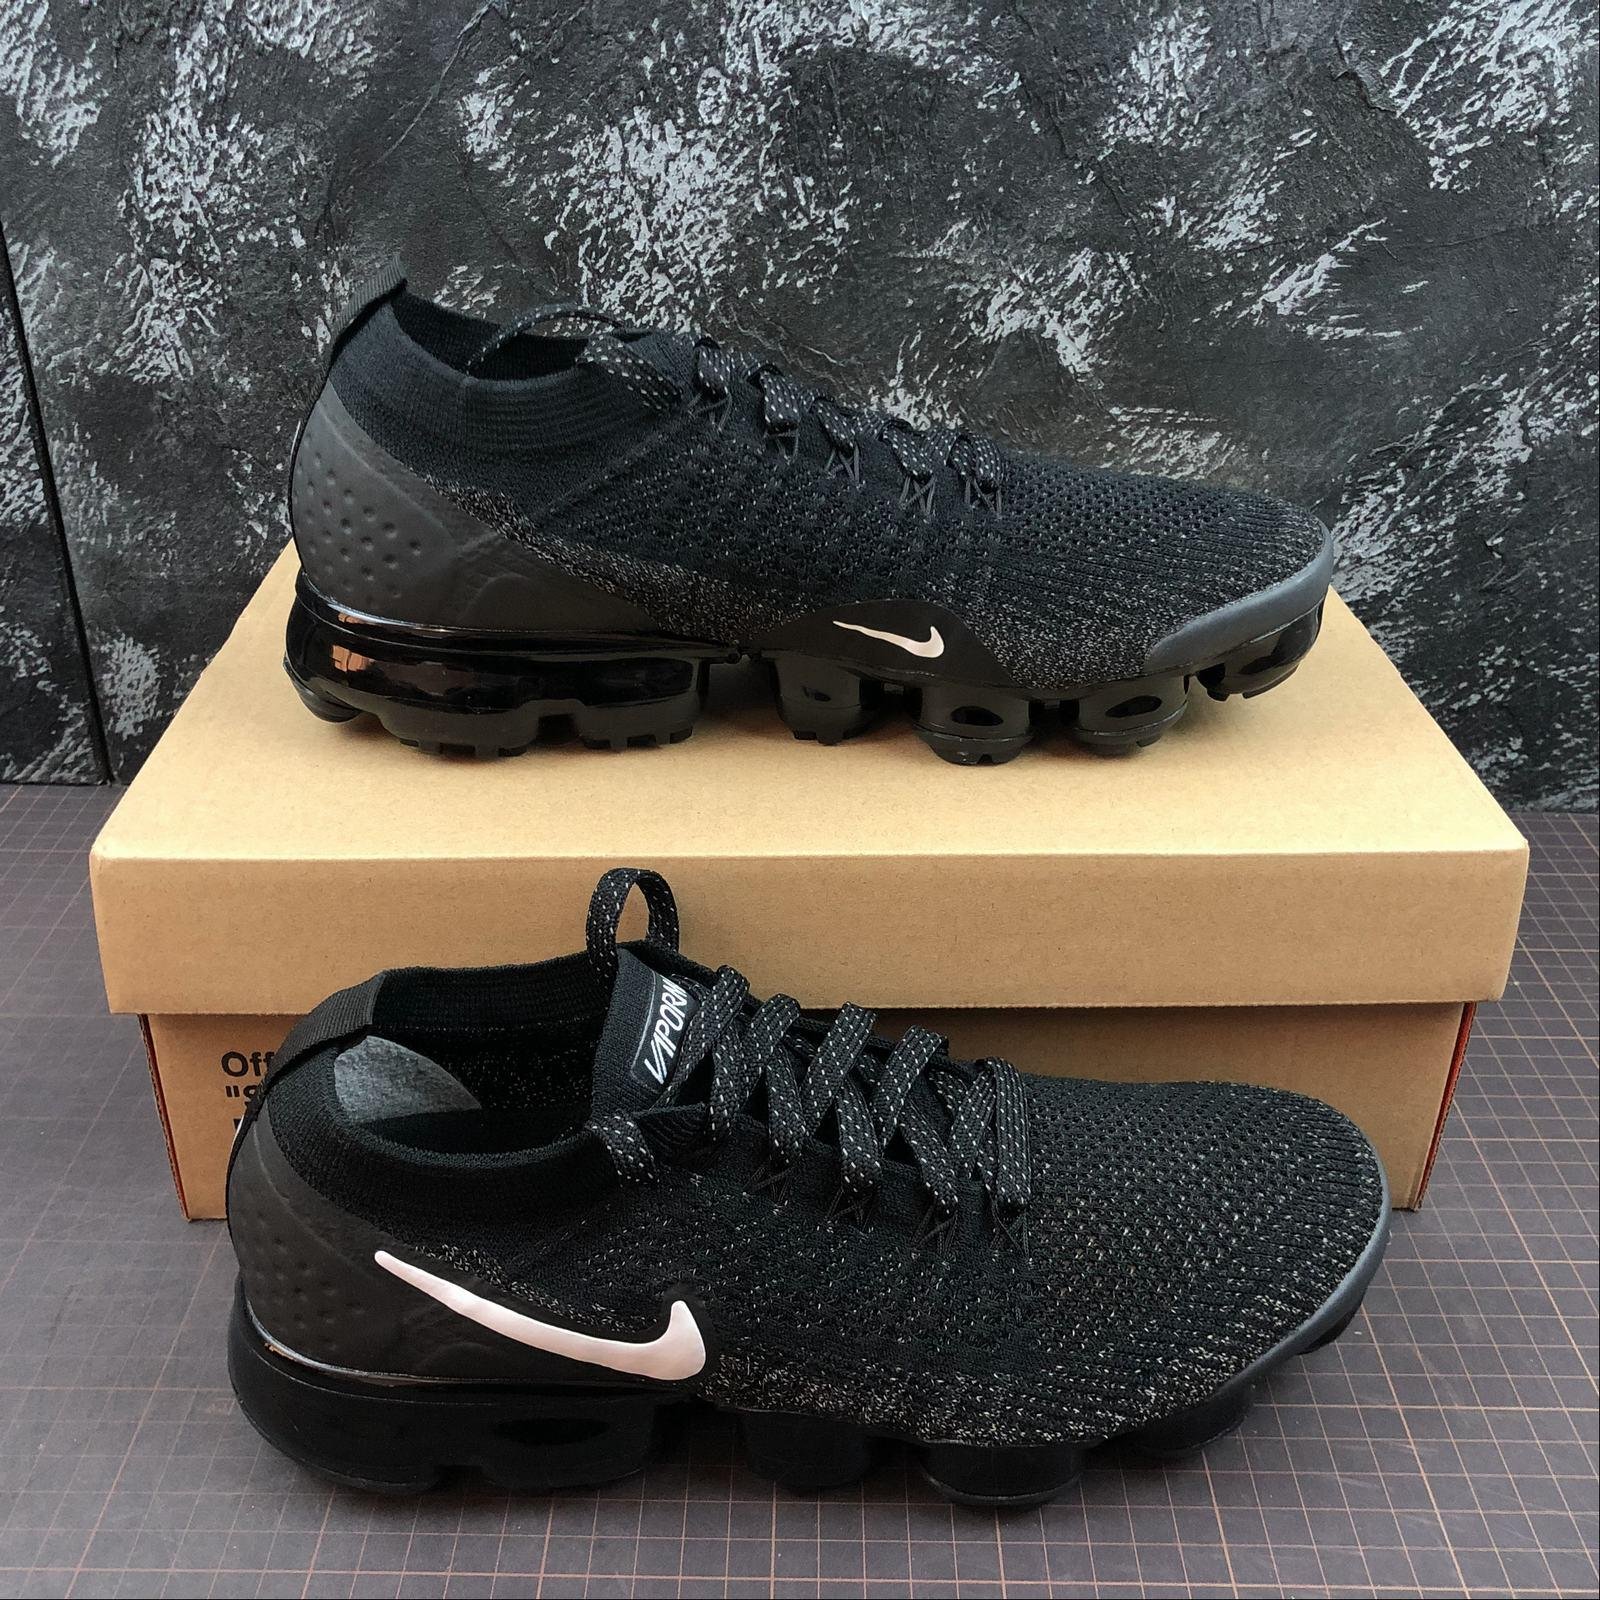 Wholesale Air Vapormax Fk AA3831-101 top quality shoes sport shoes (China  Trading Company) - Athletic & Sports Shoes - Shoes Products -